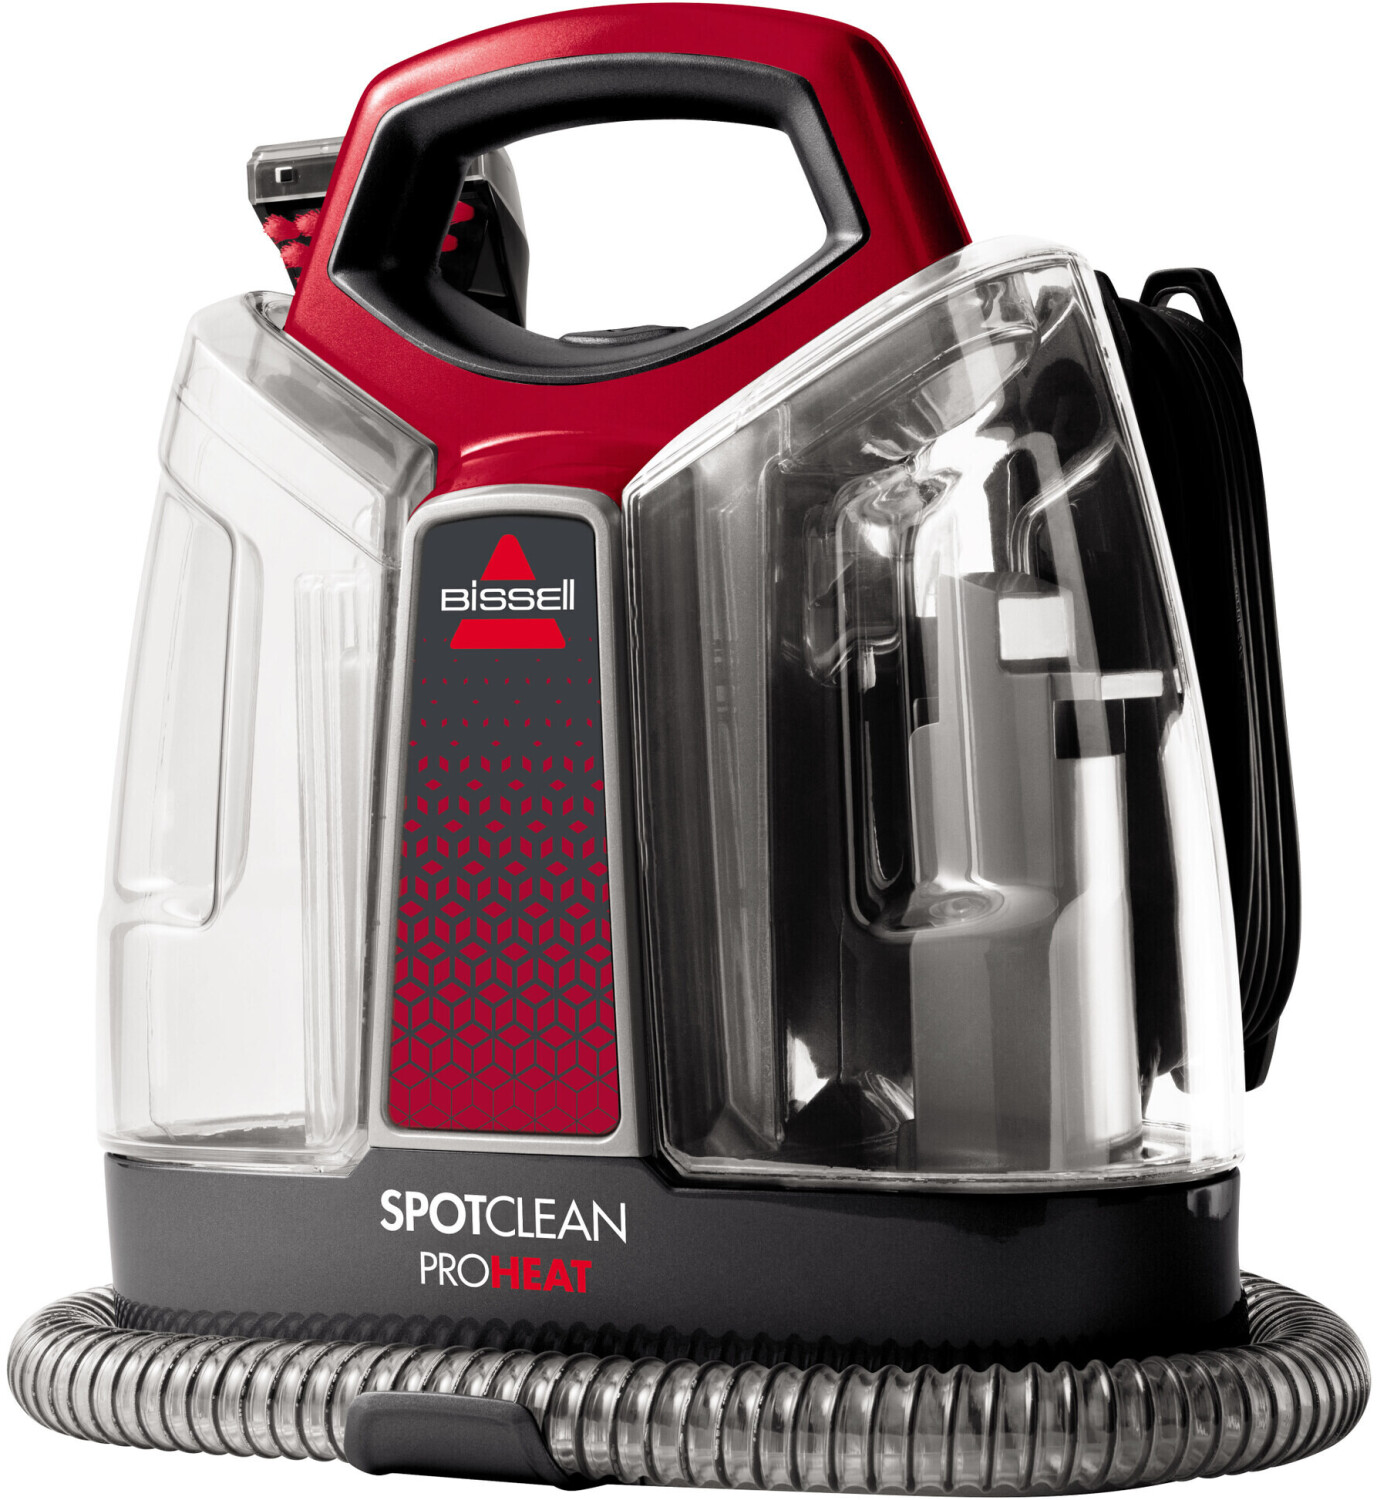 Clean carpets, couches, more w/ Bissell's SpotClean ProHeat: $50 (Refurb,  Orig. $100)